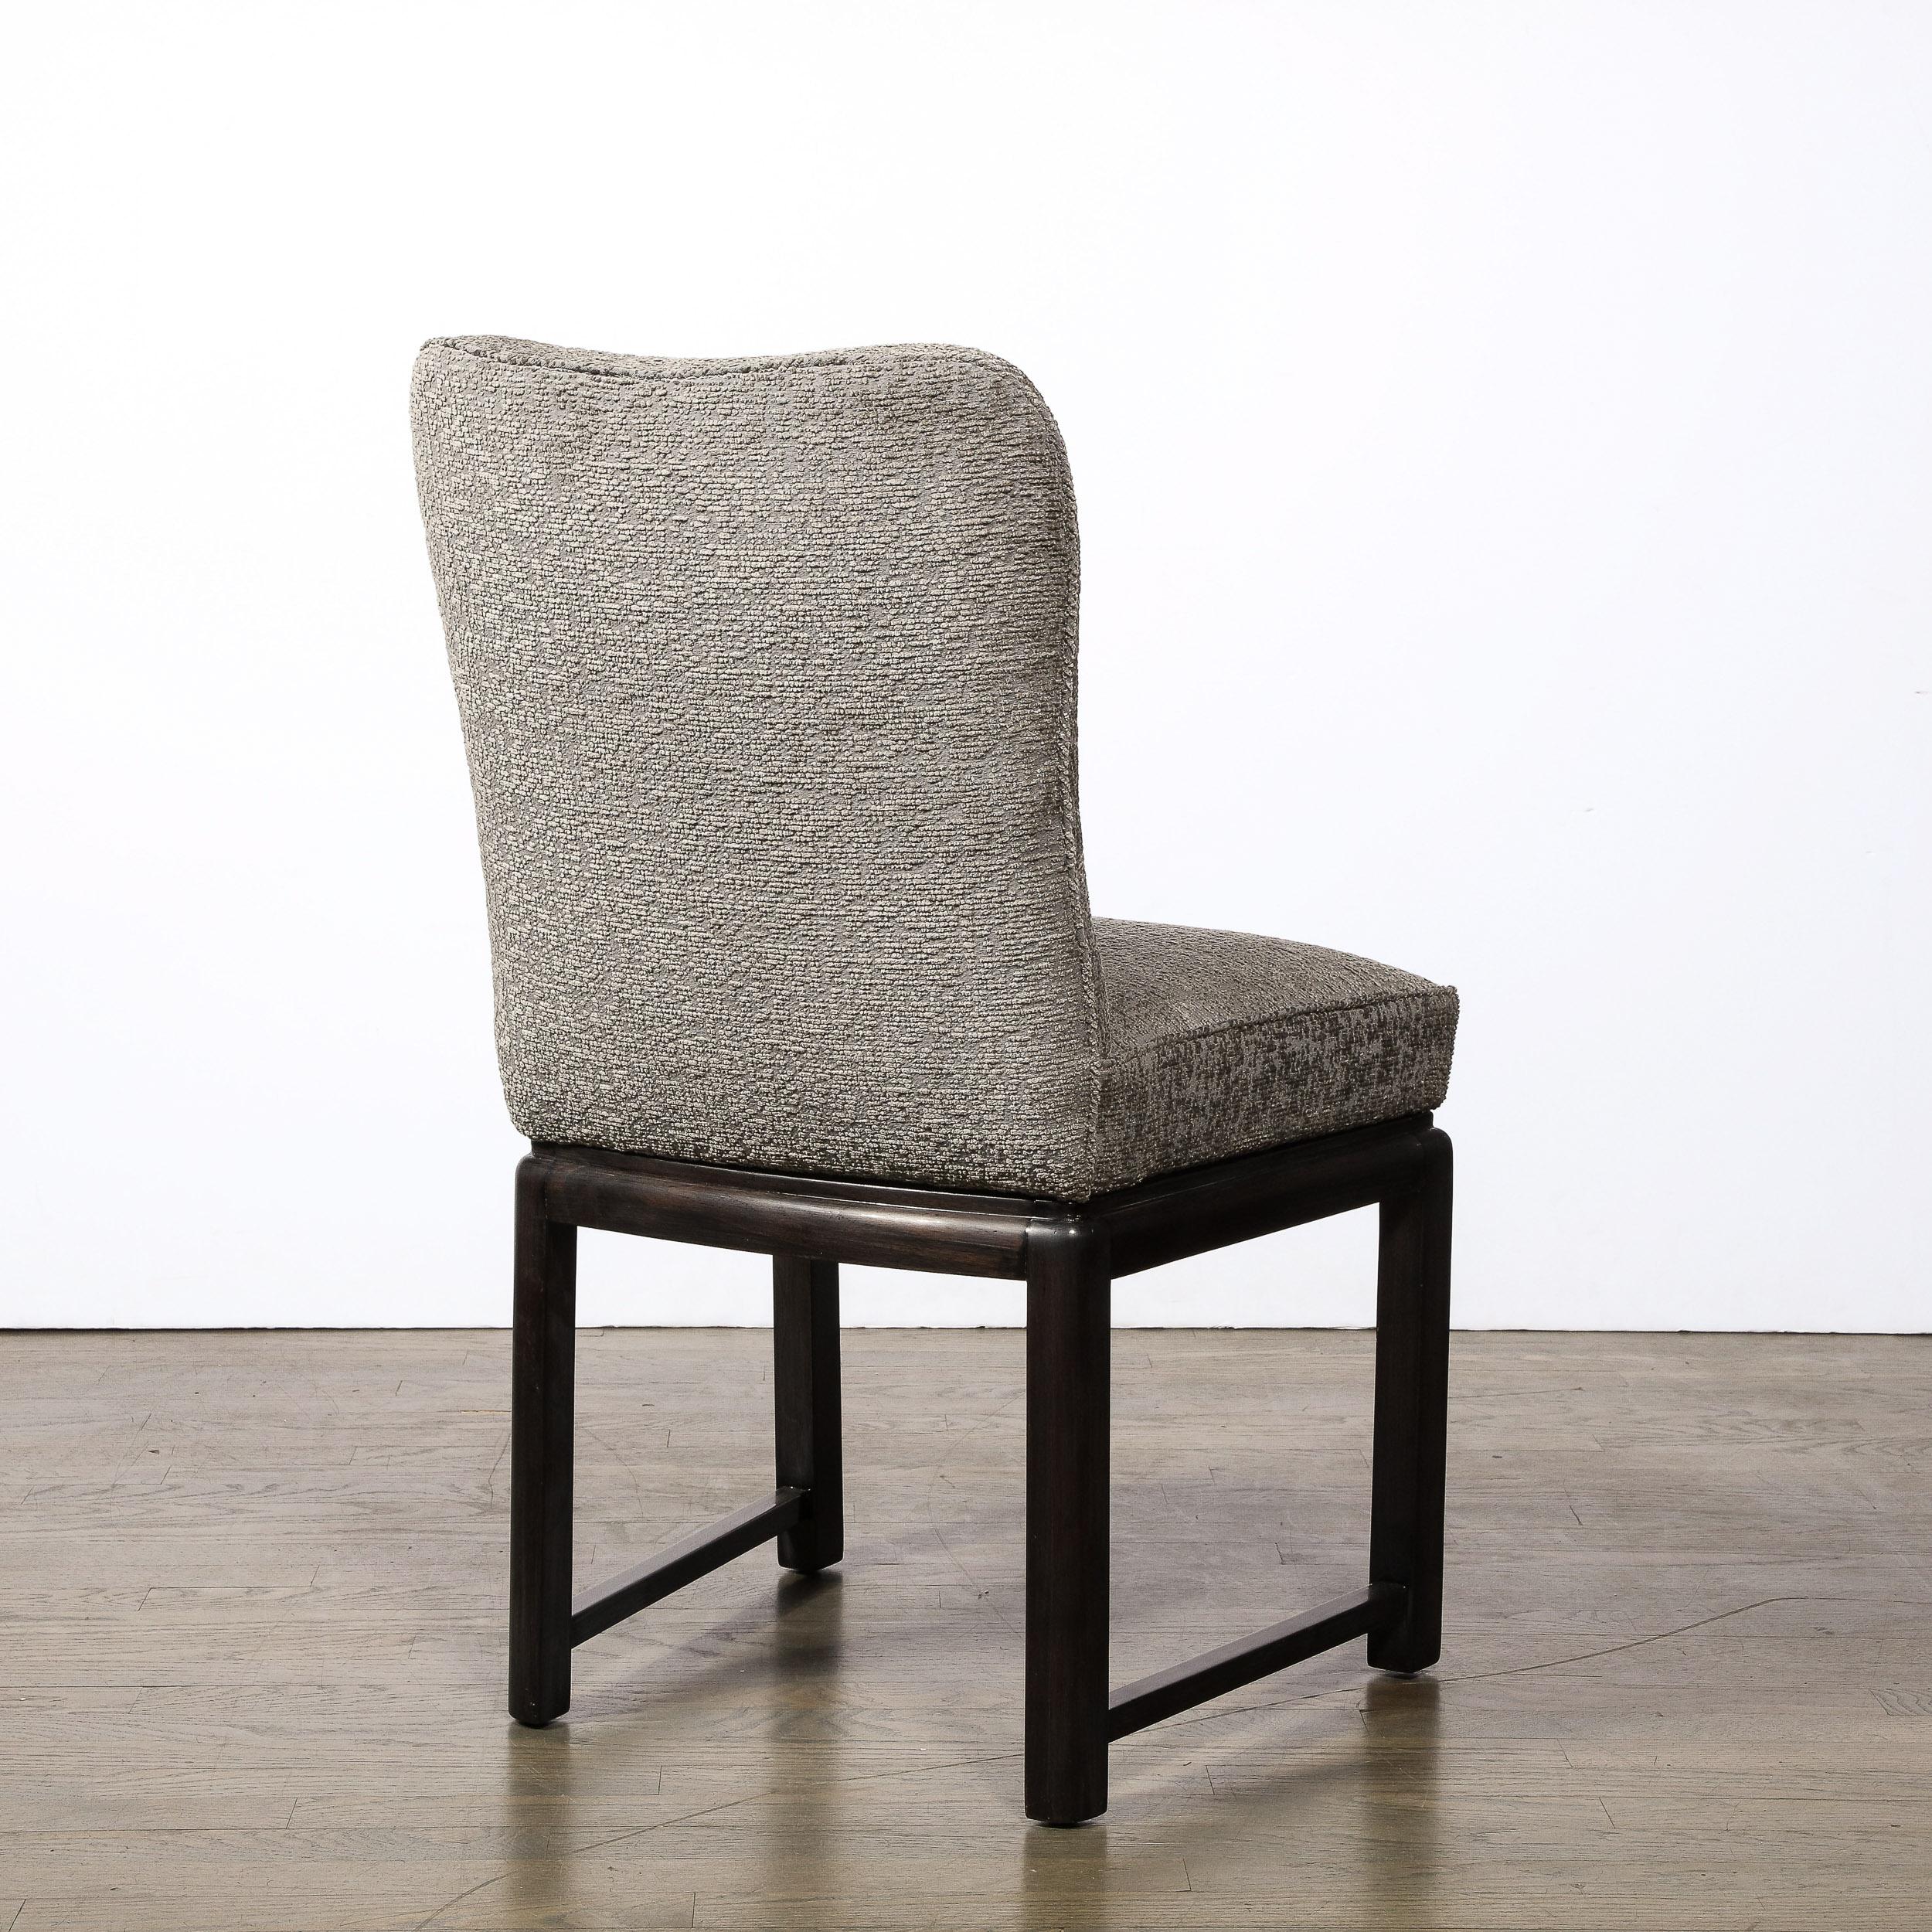 Mid-Century Chair in Ebonized Walnut Base with Holly Hunt Fabric For Sale 2